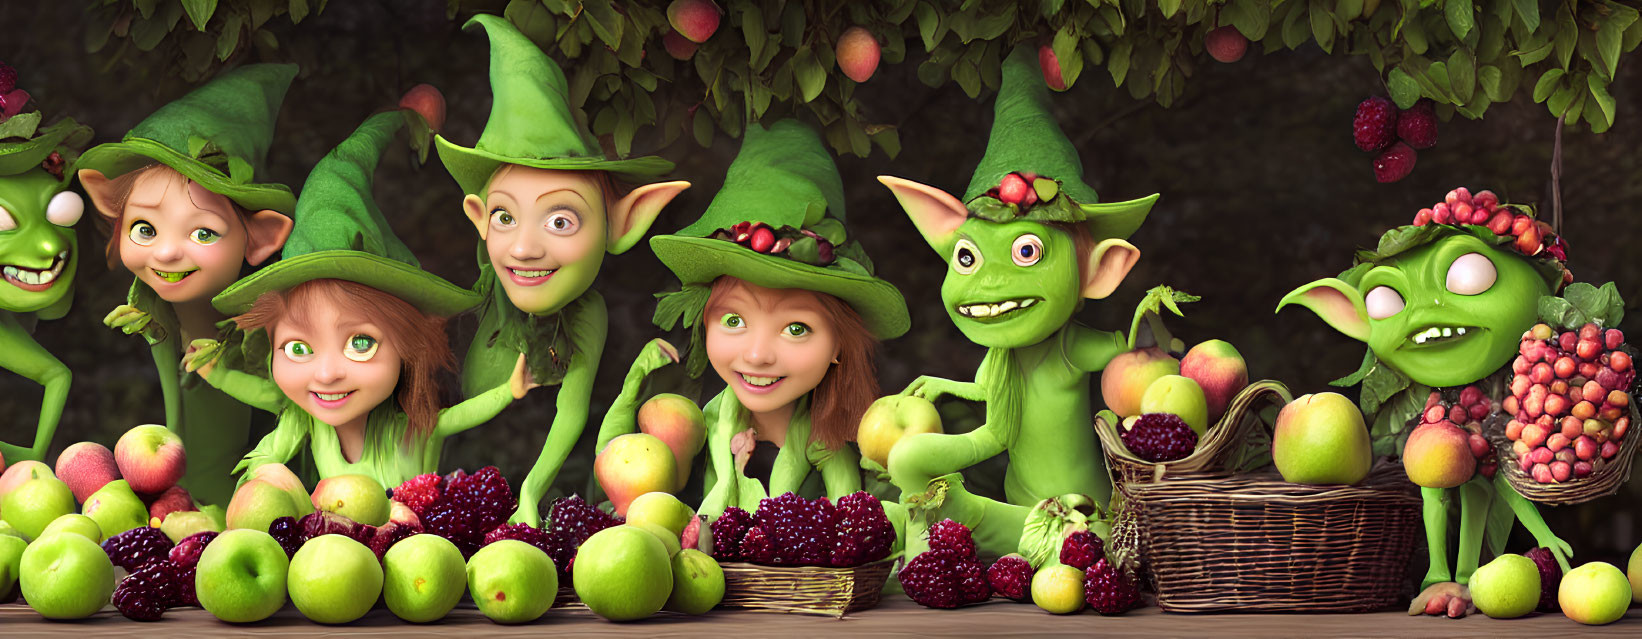 Colorful animated characters in a fruit-filled garden setting